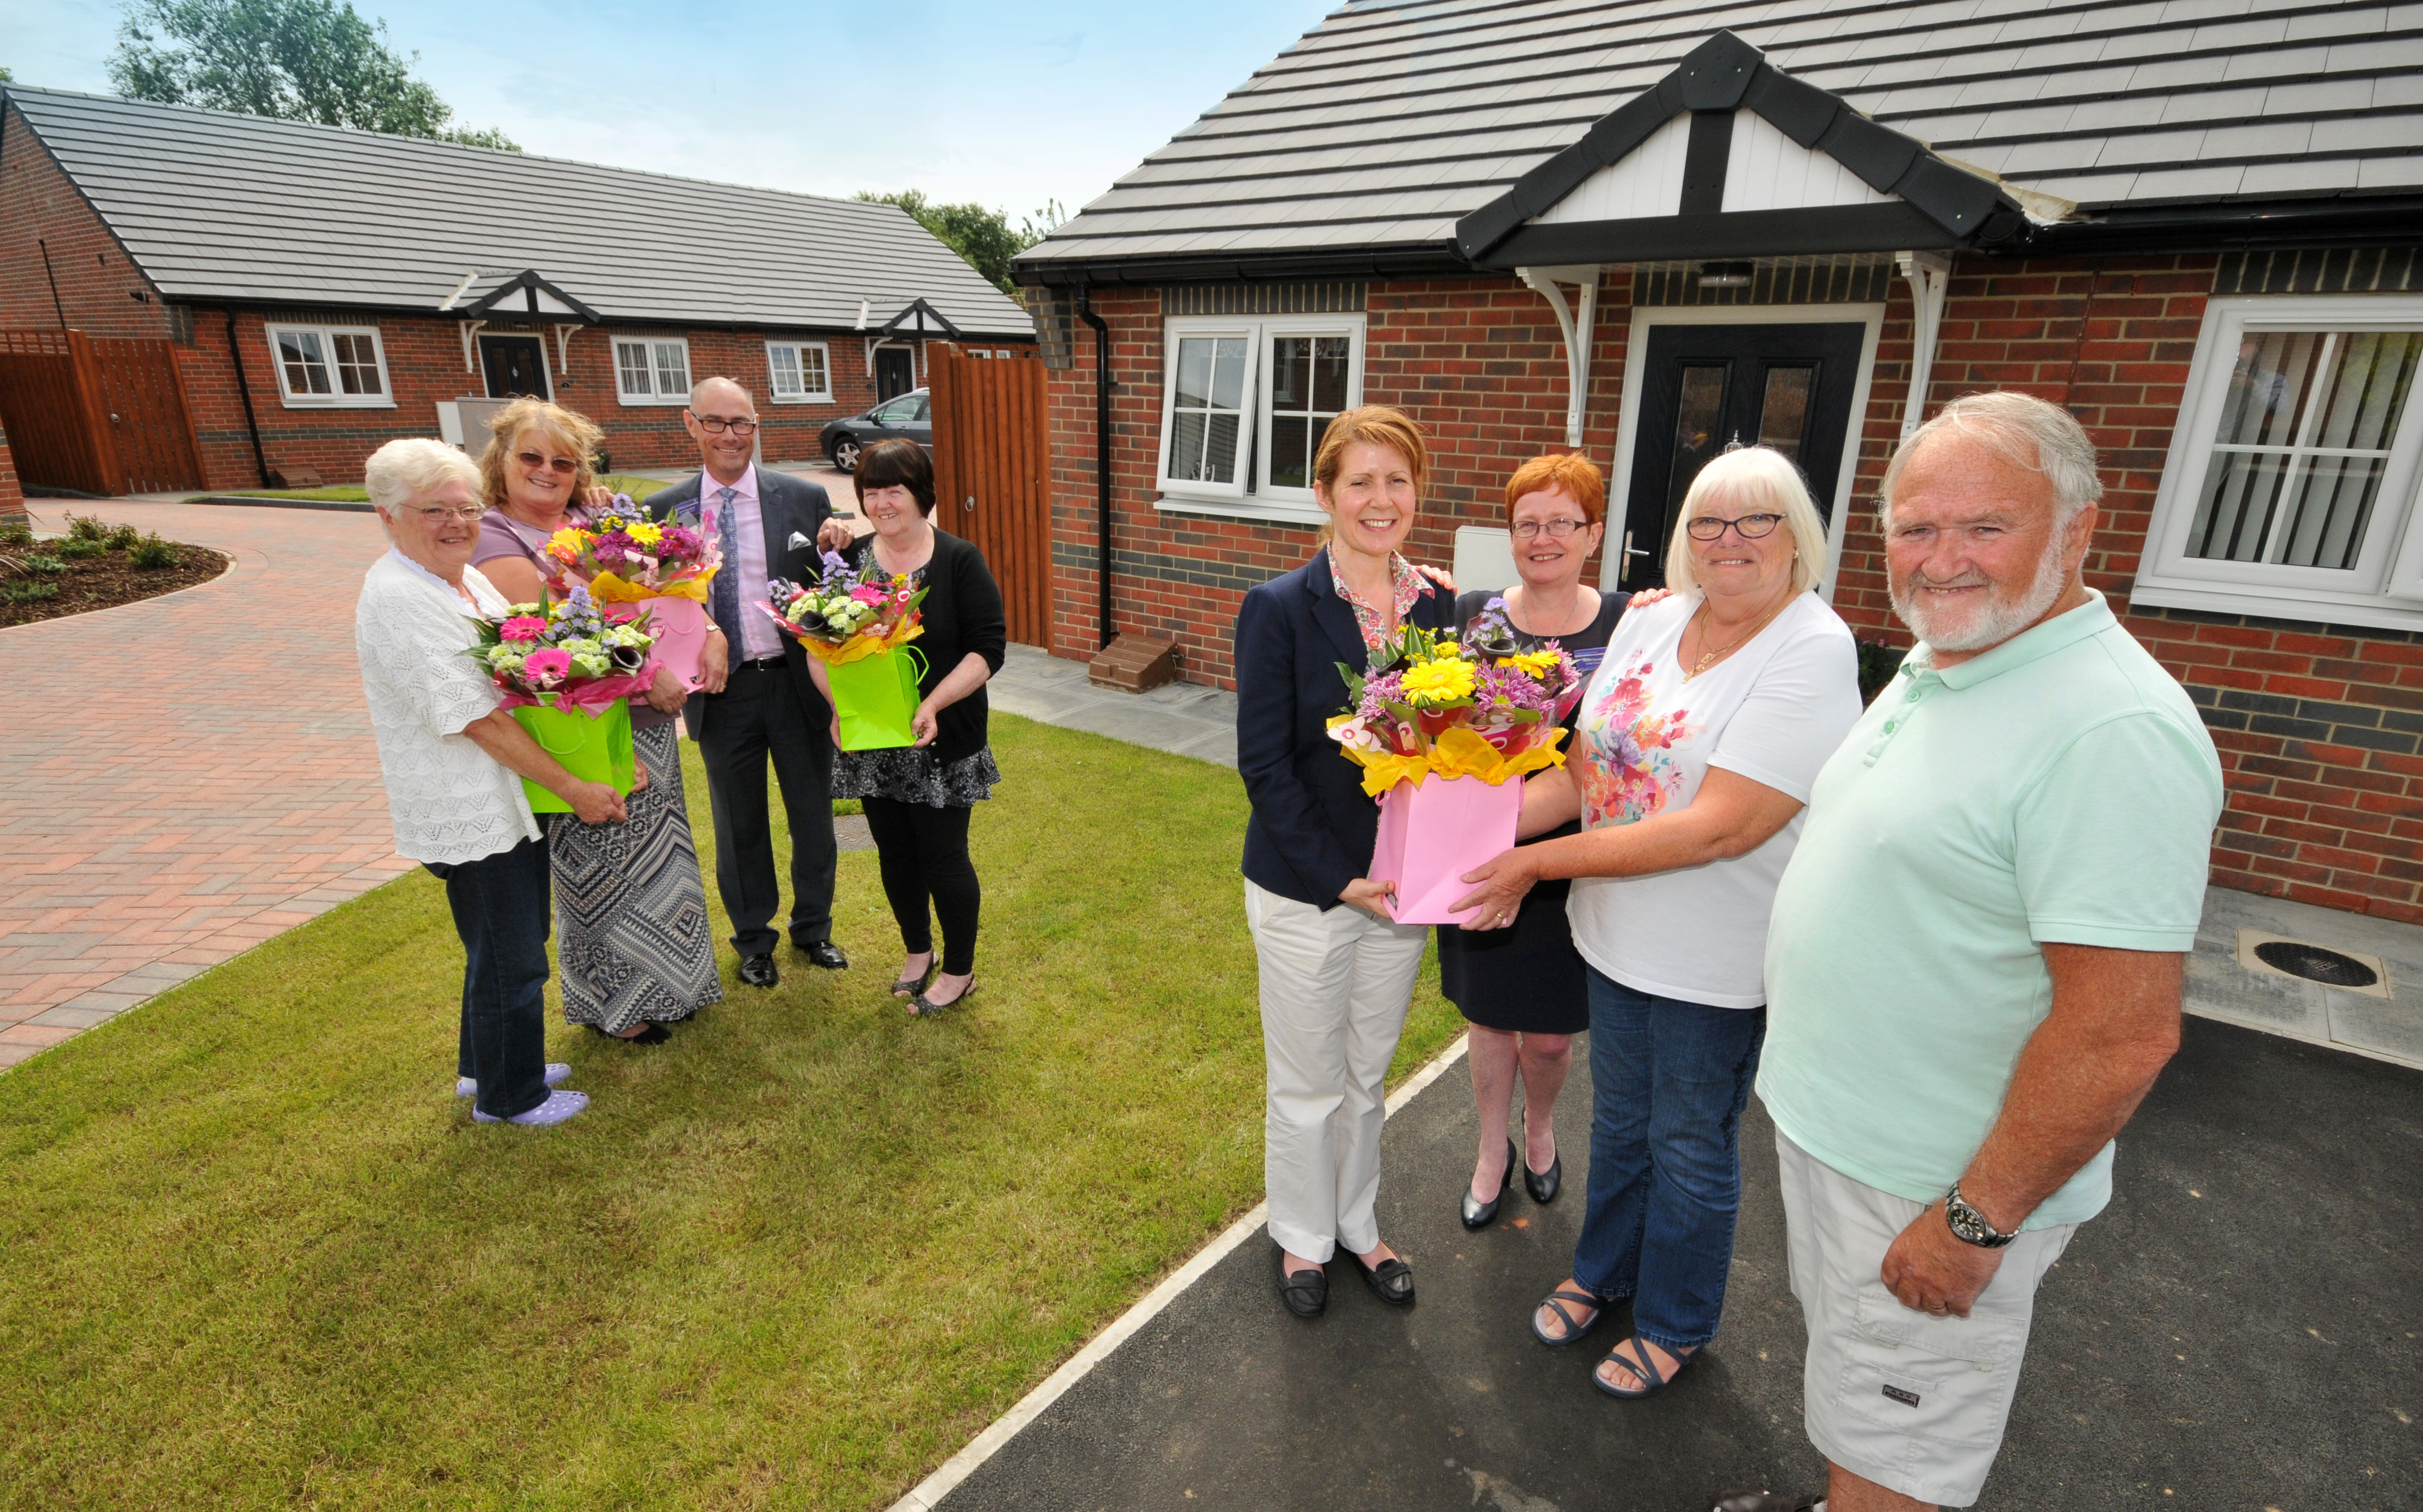 £6m investment in new homes - Railway Housing Association